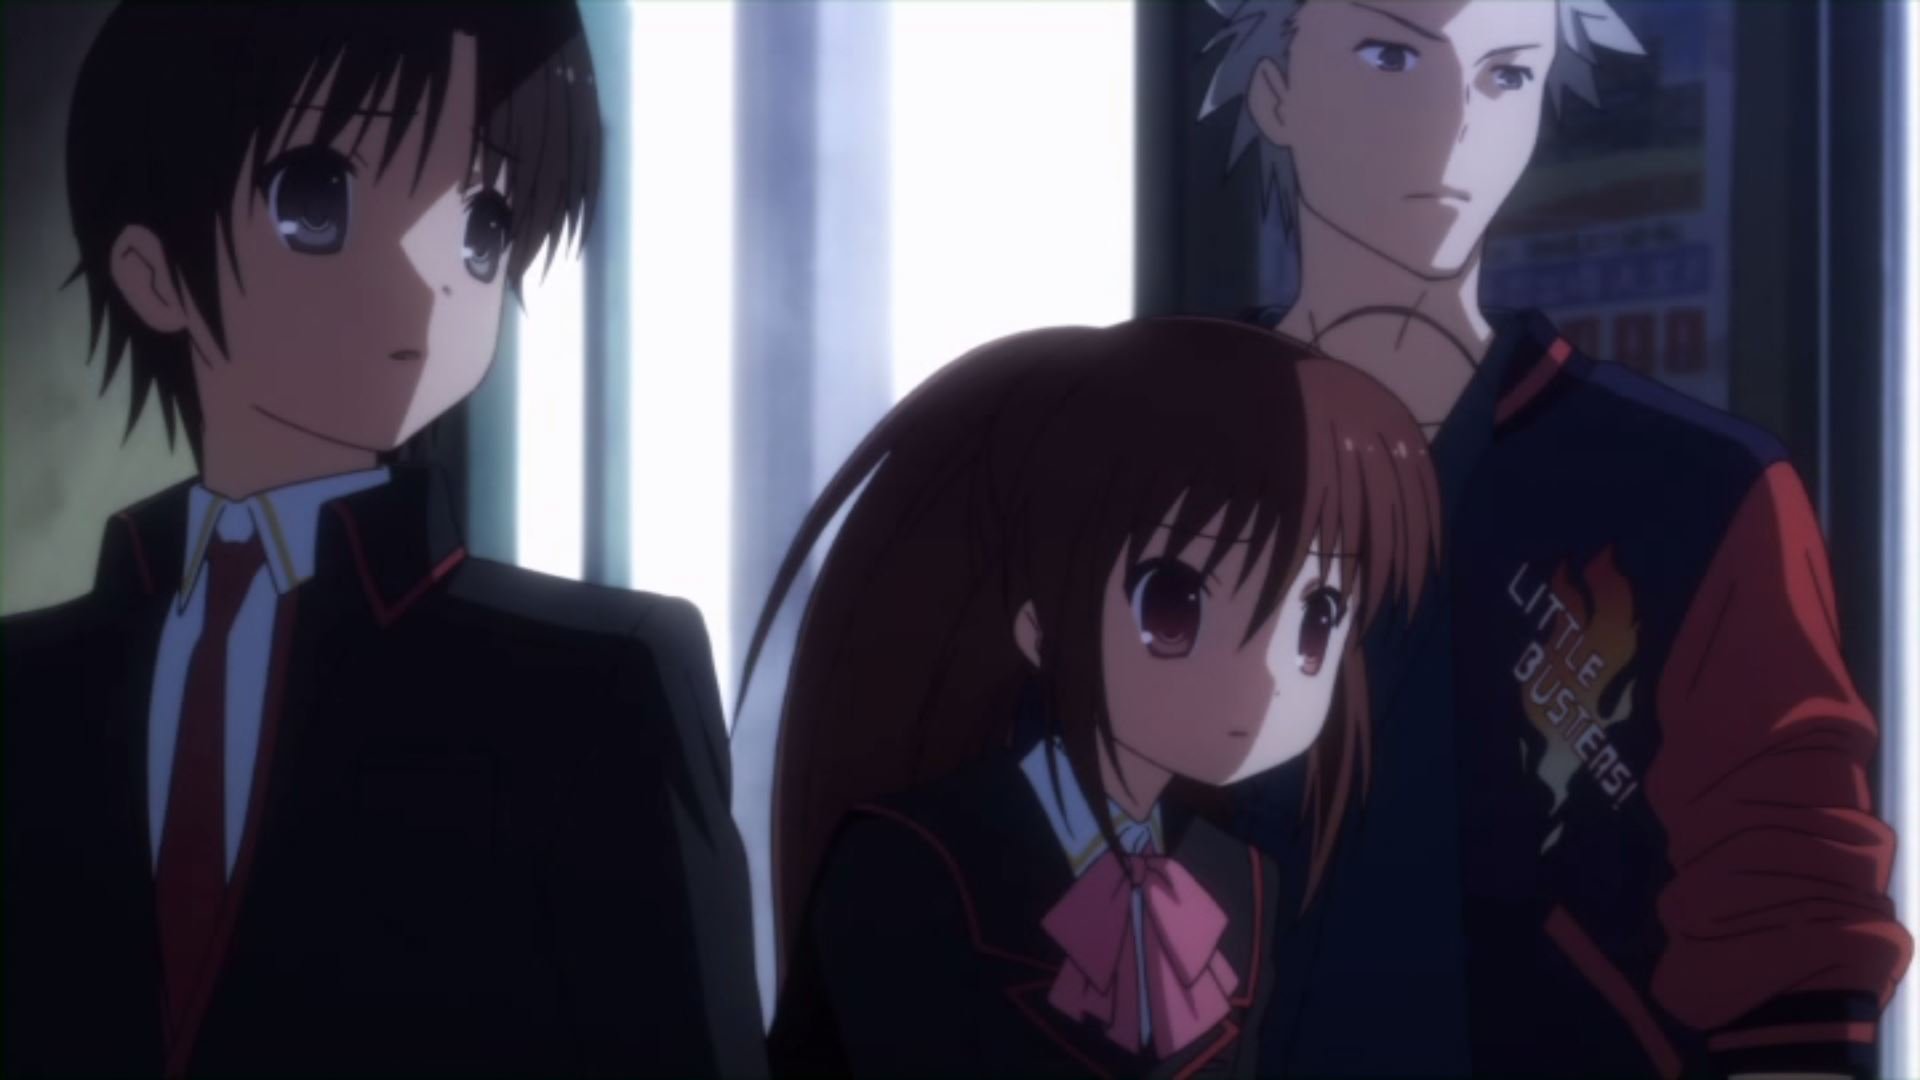 Little busters episode 1 subbed